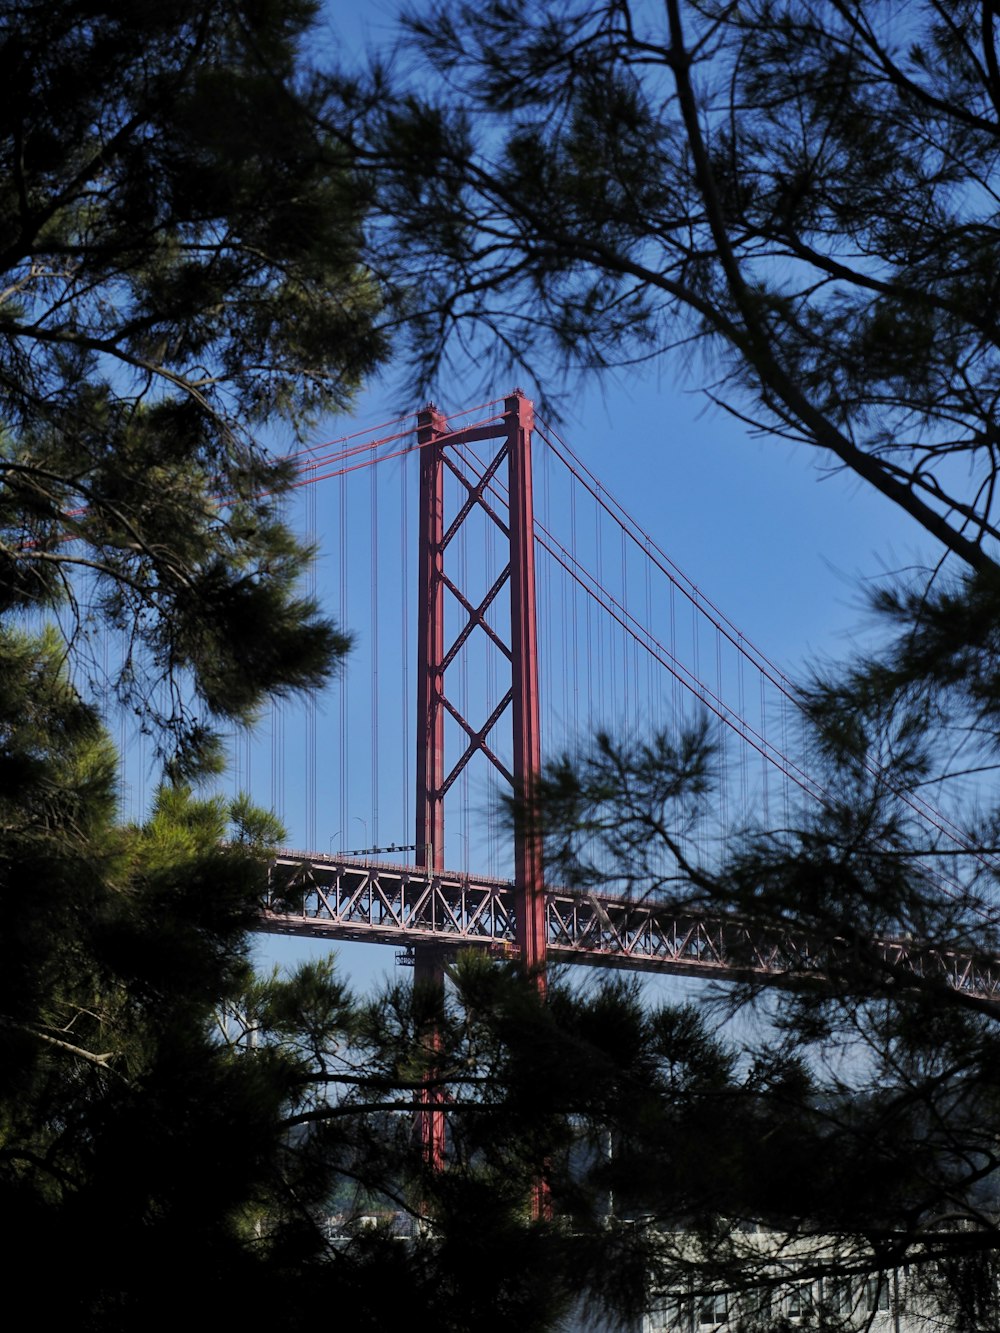 a large red bridge spanning over a large body of water